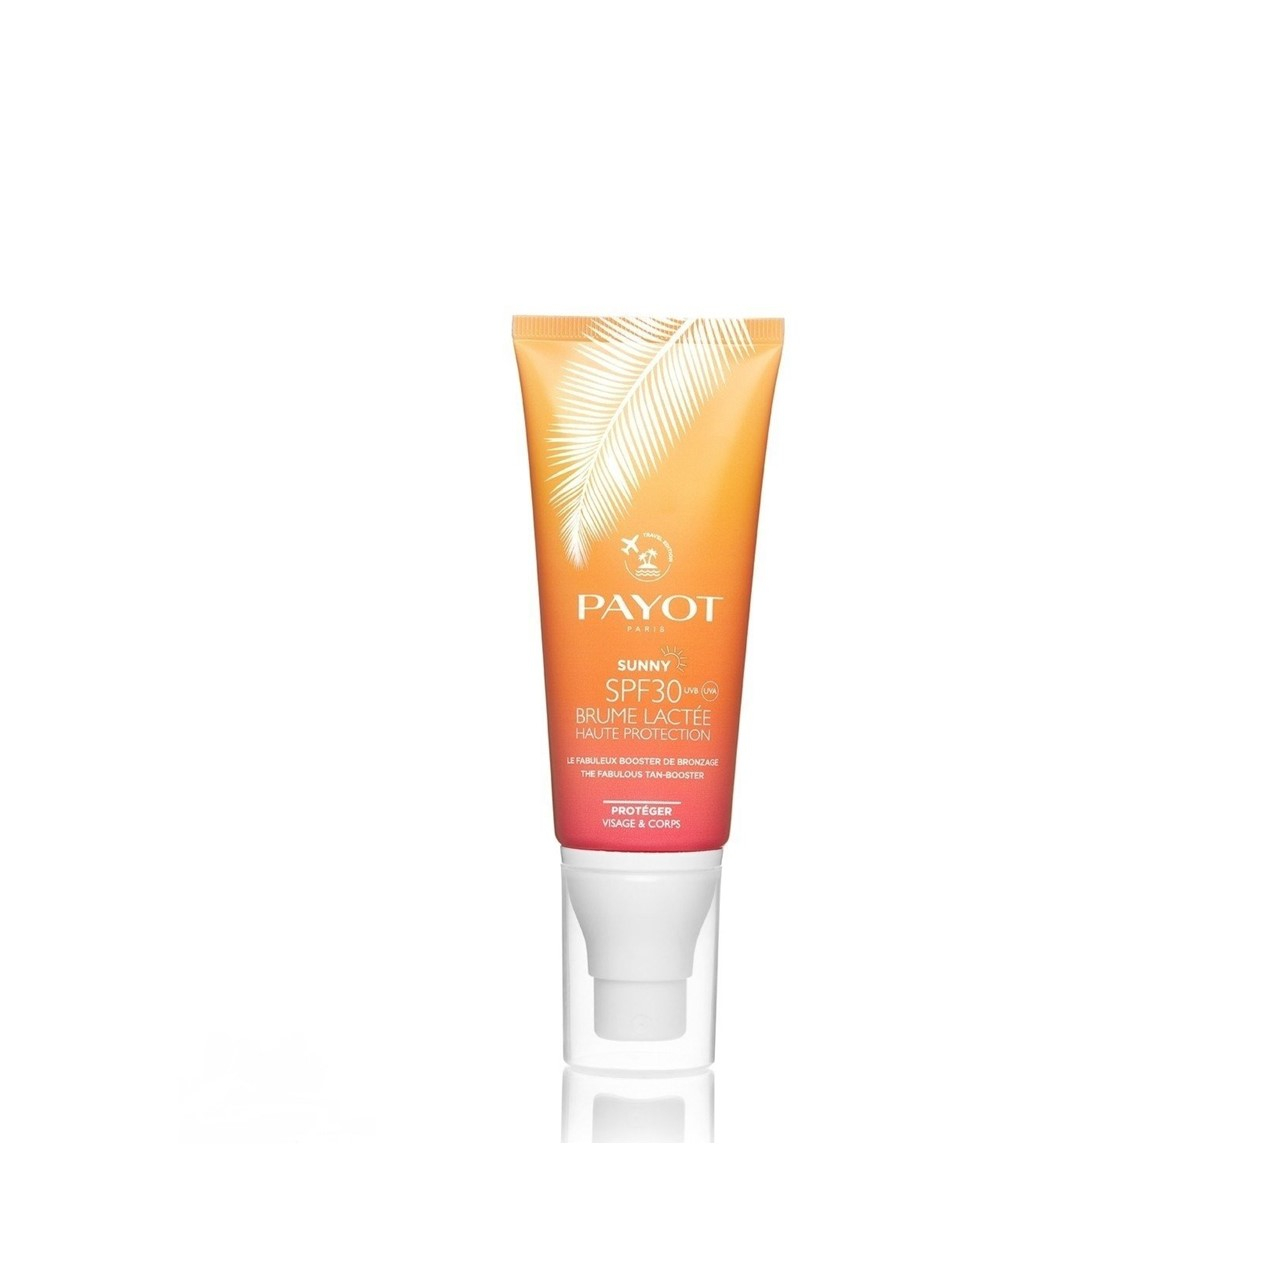 Payot Sunny Brume Lactée The Fabulous Tan-Booster SPF30 100ml